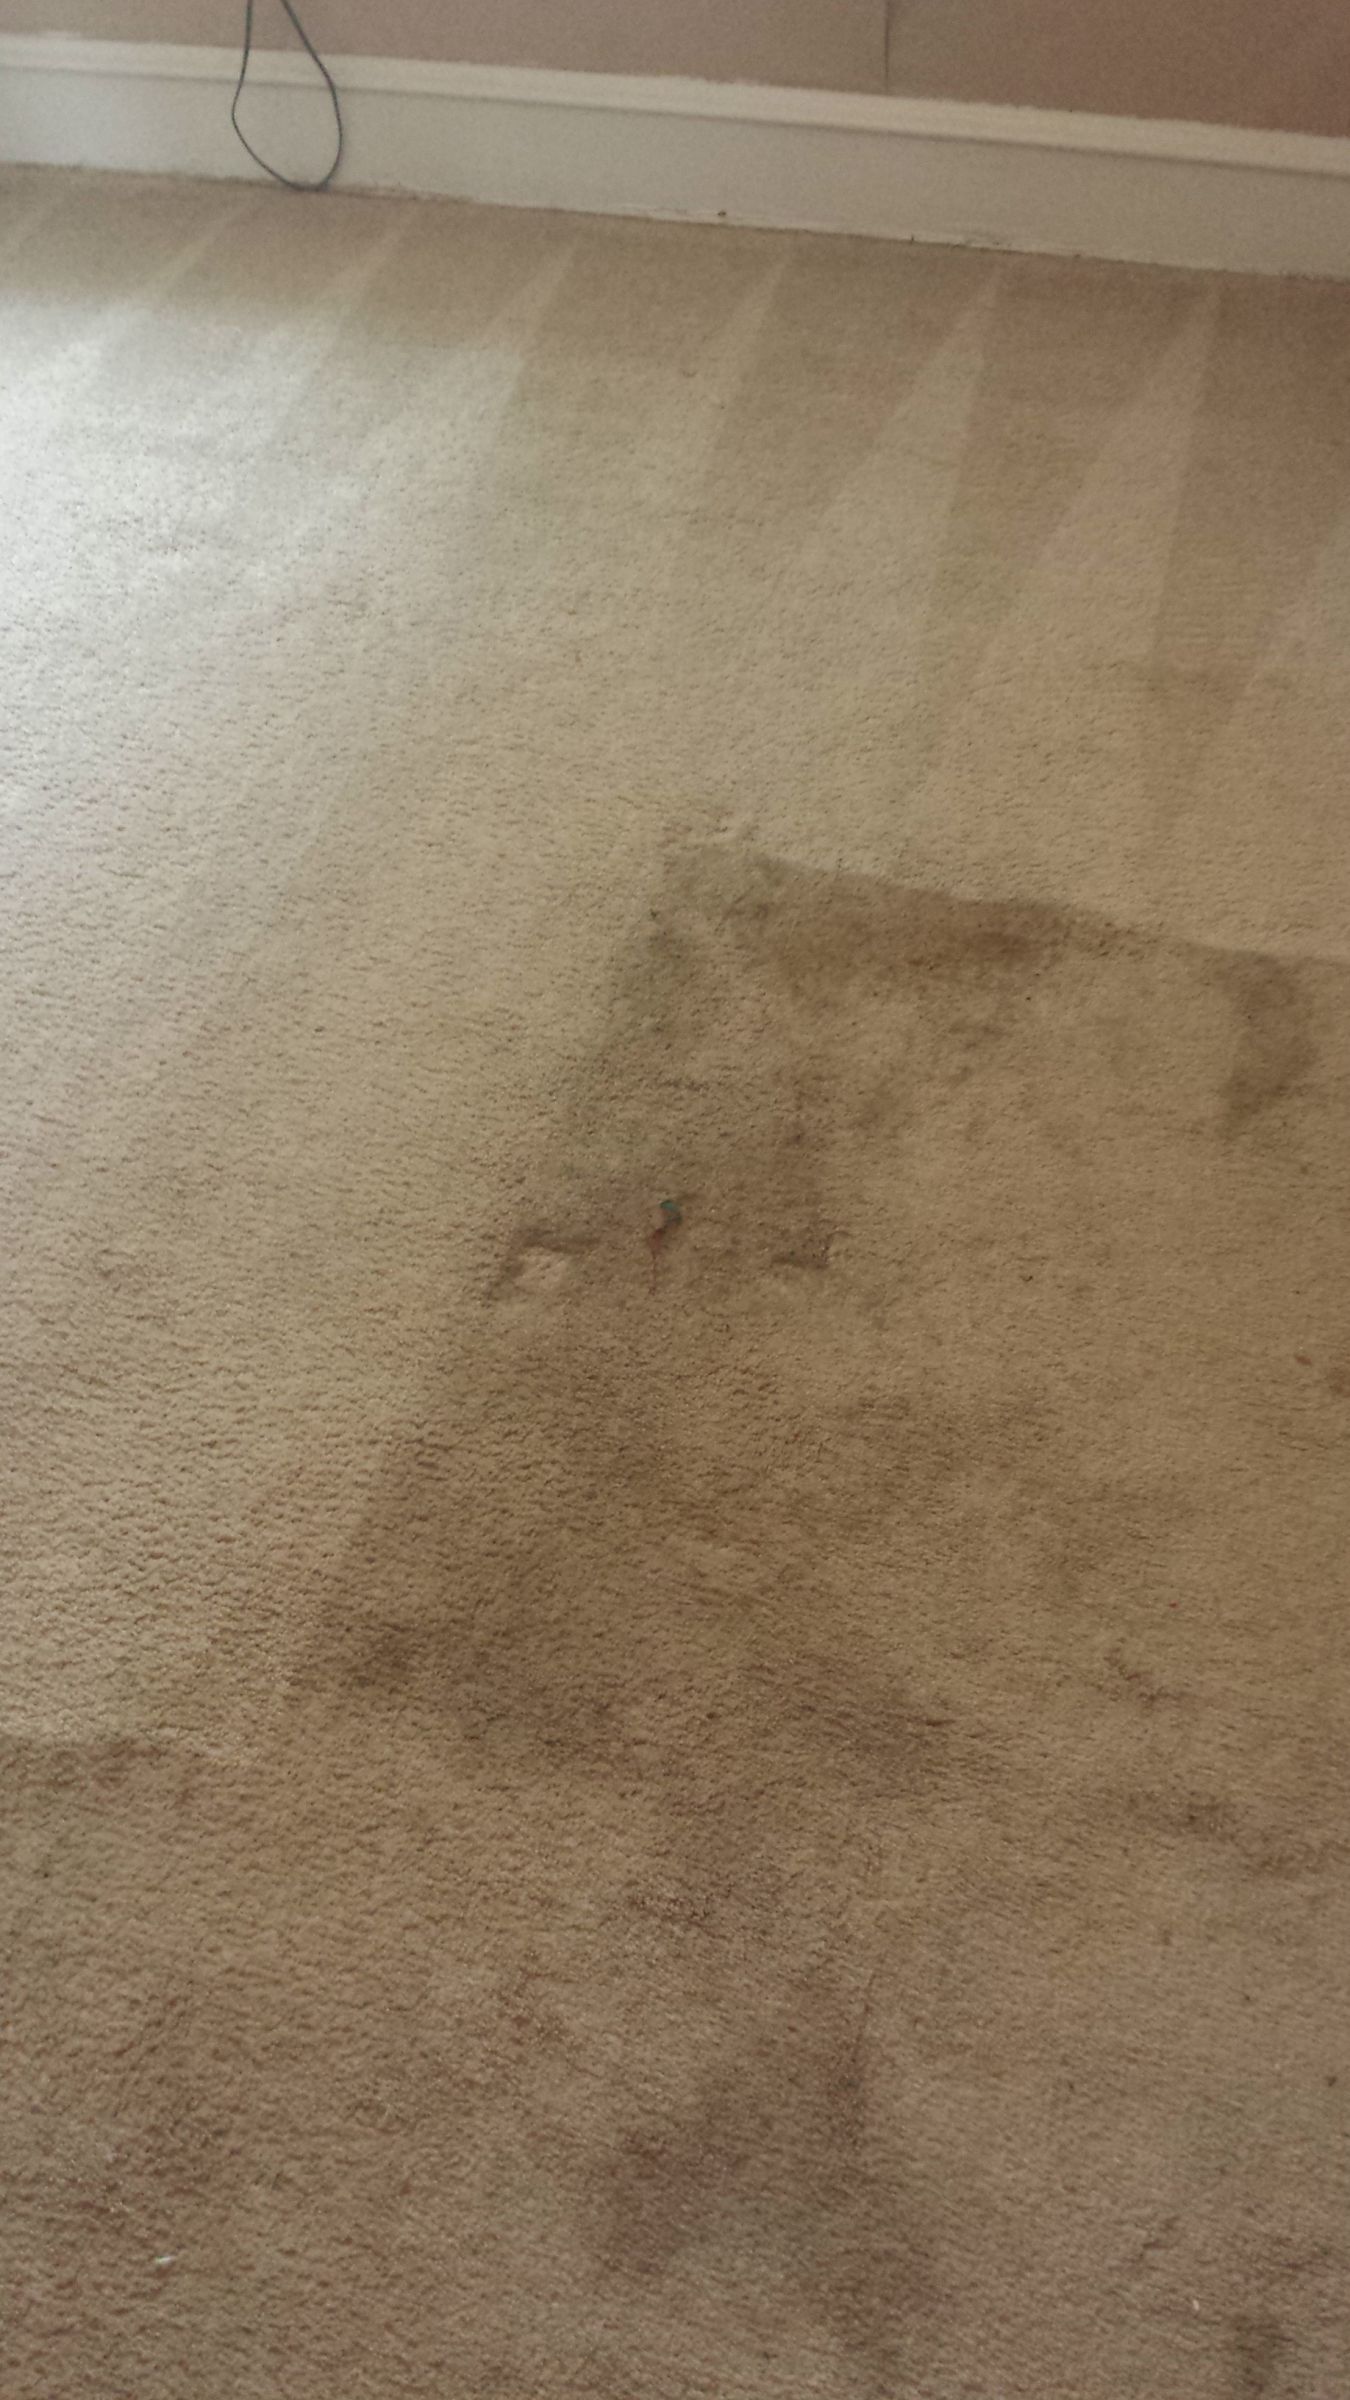 Moorestown Carpet Cleaning Professionals